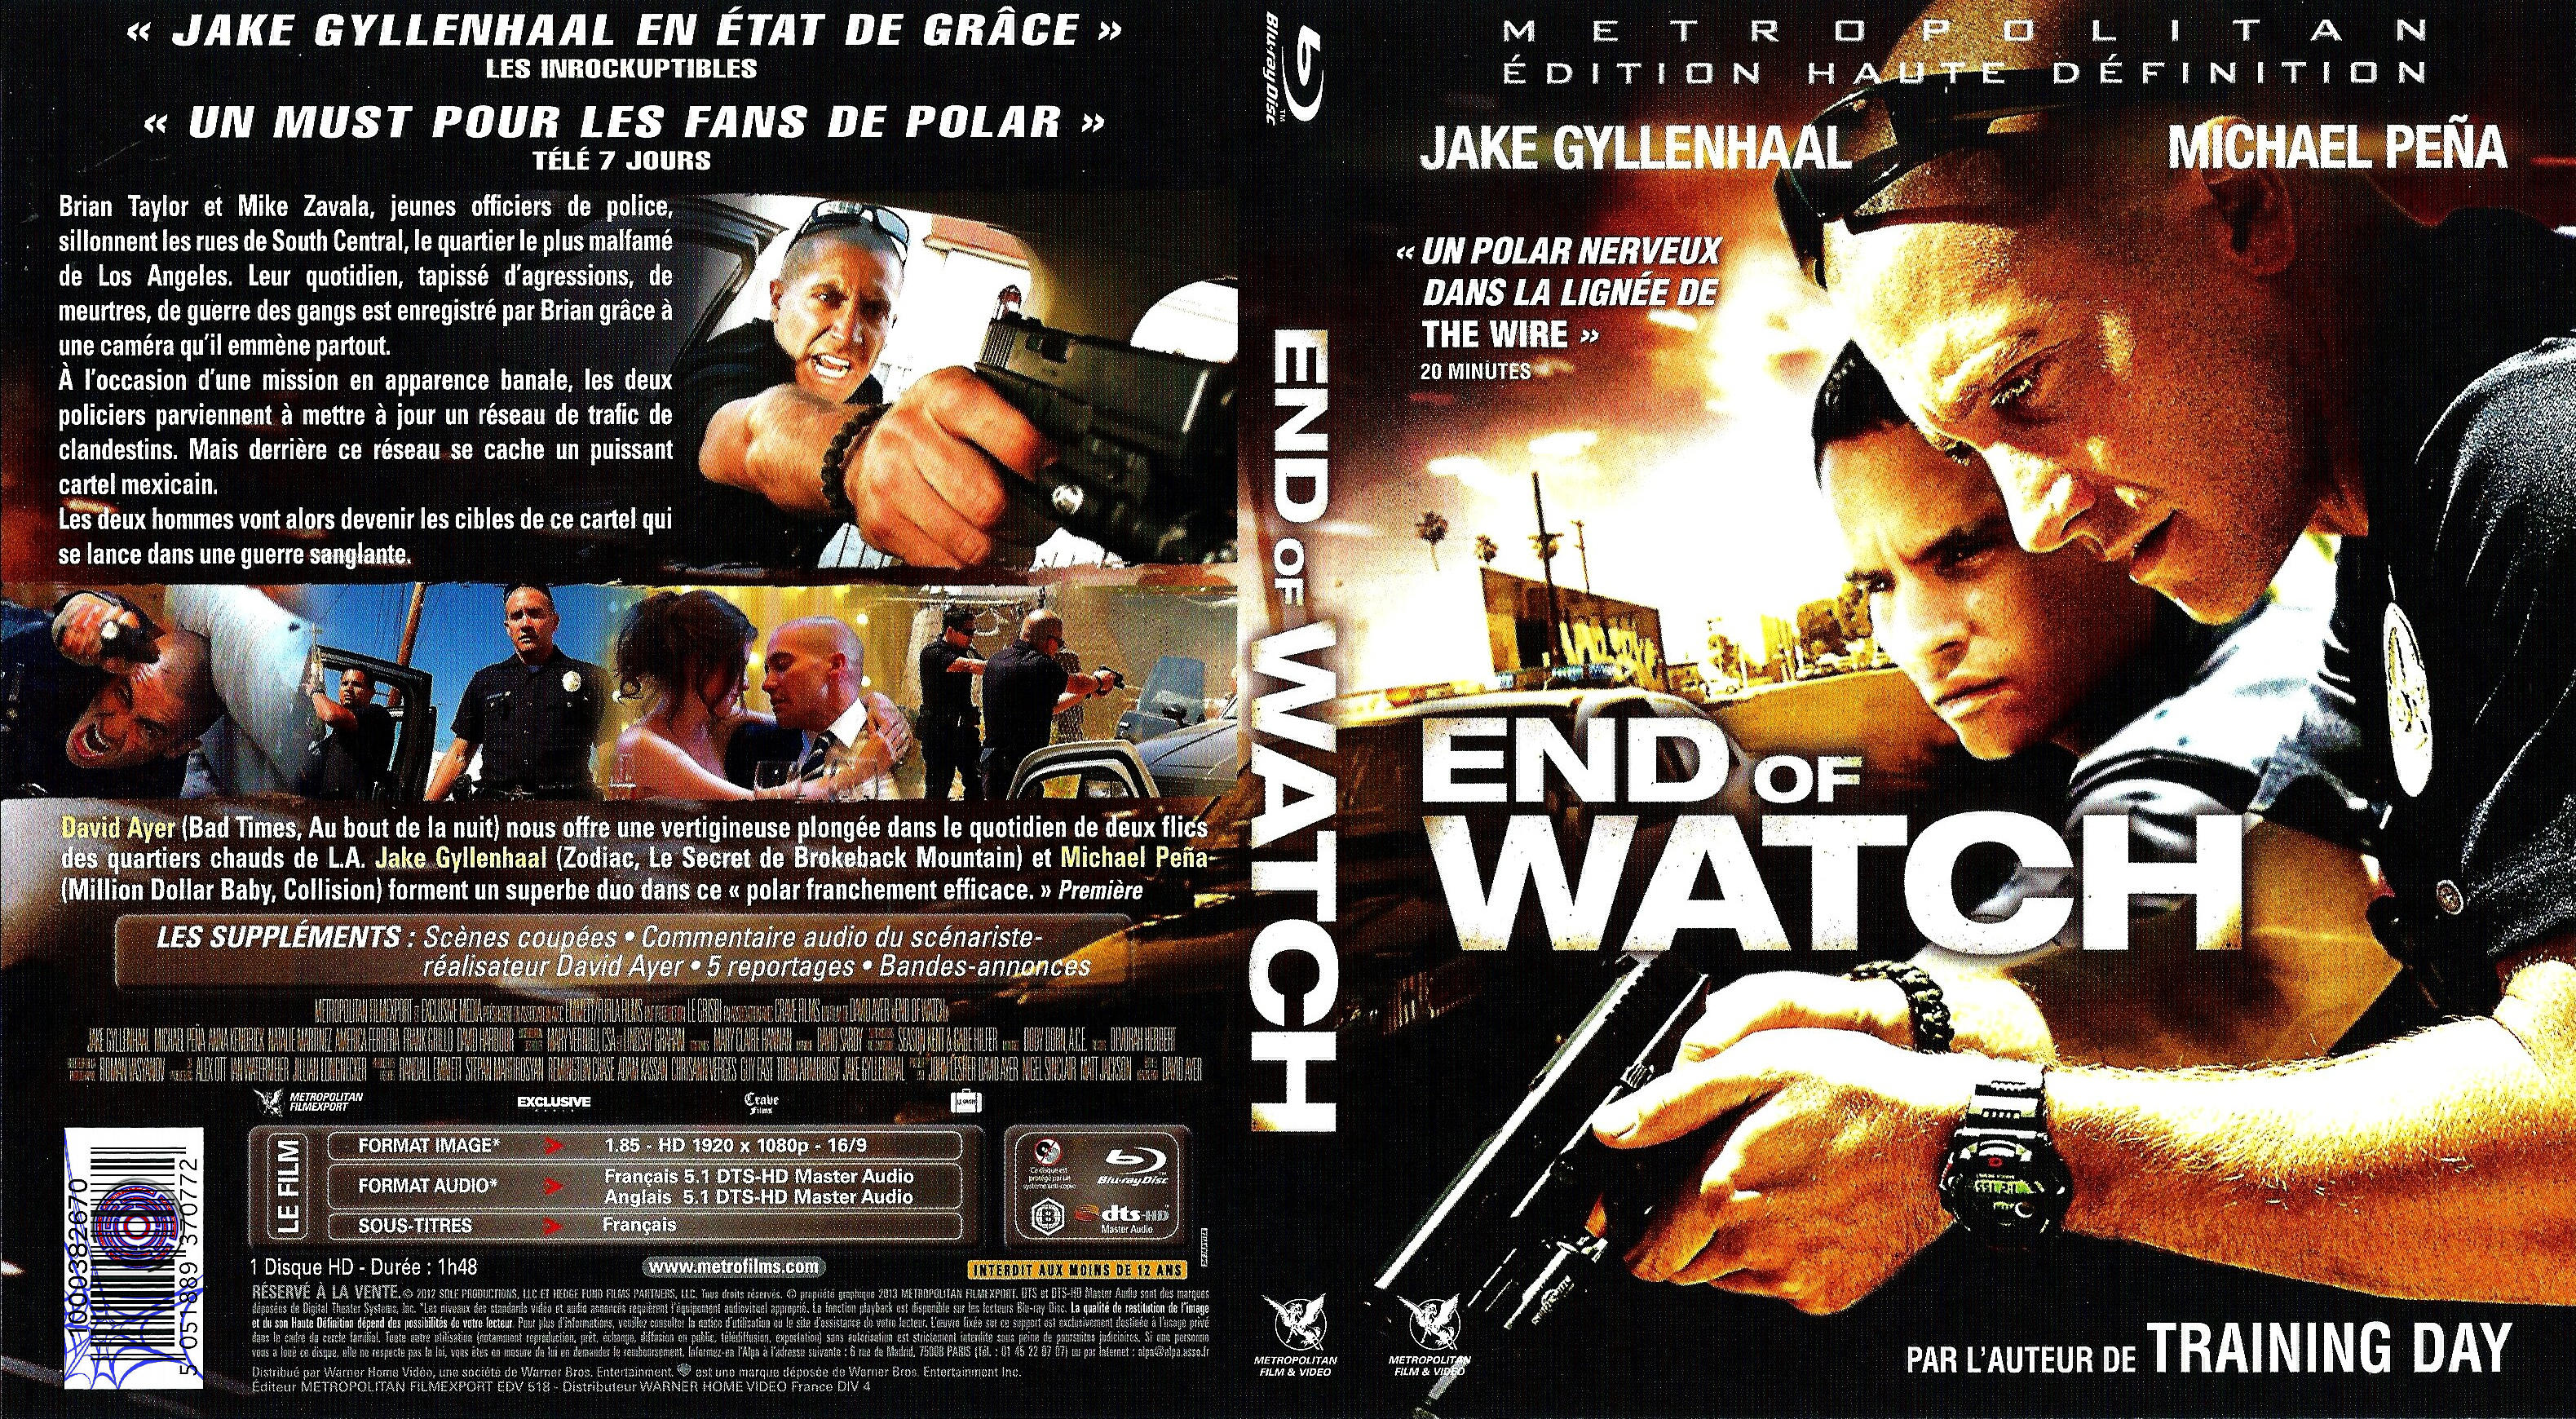 Jaquette DVD End of watch (BLU-RAY)